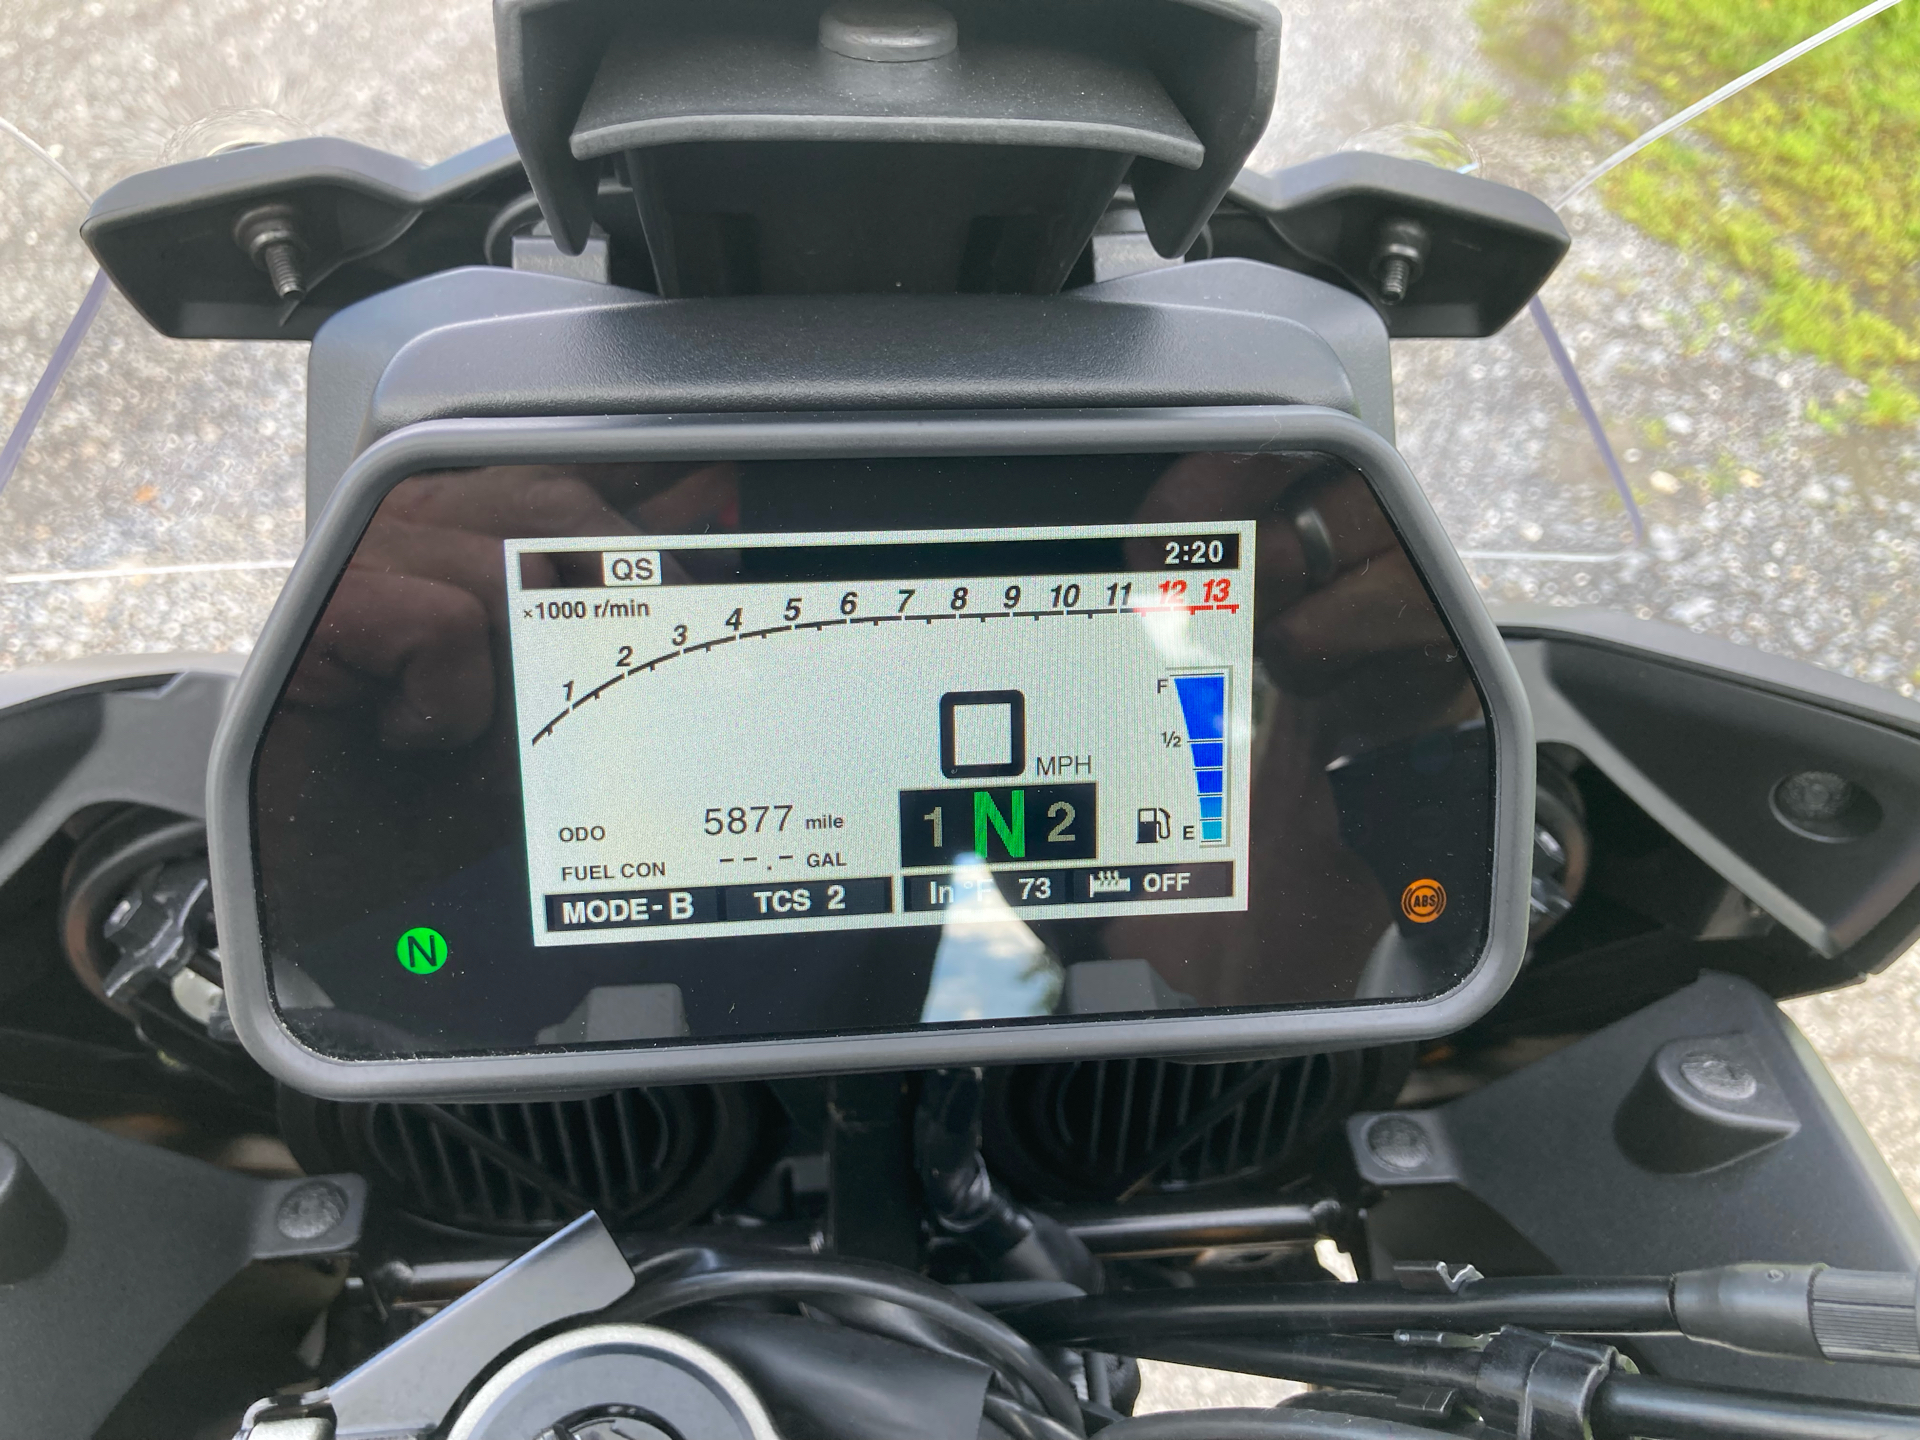 2019 Yamaha Tracer 900 GT in New Haven, Vermont - Photo 6